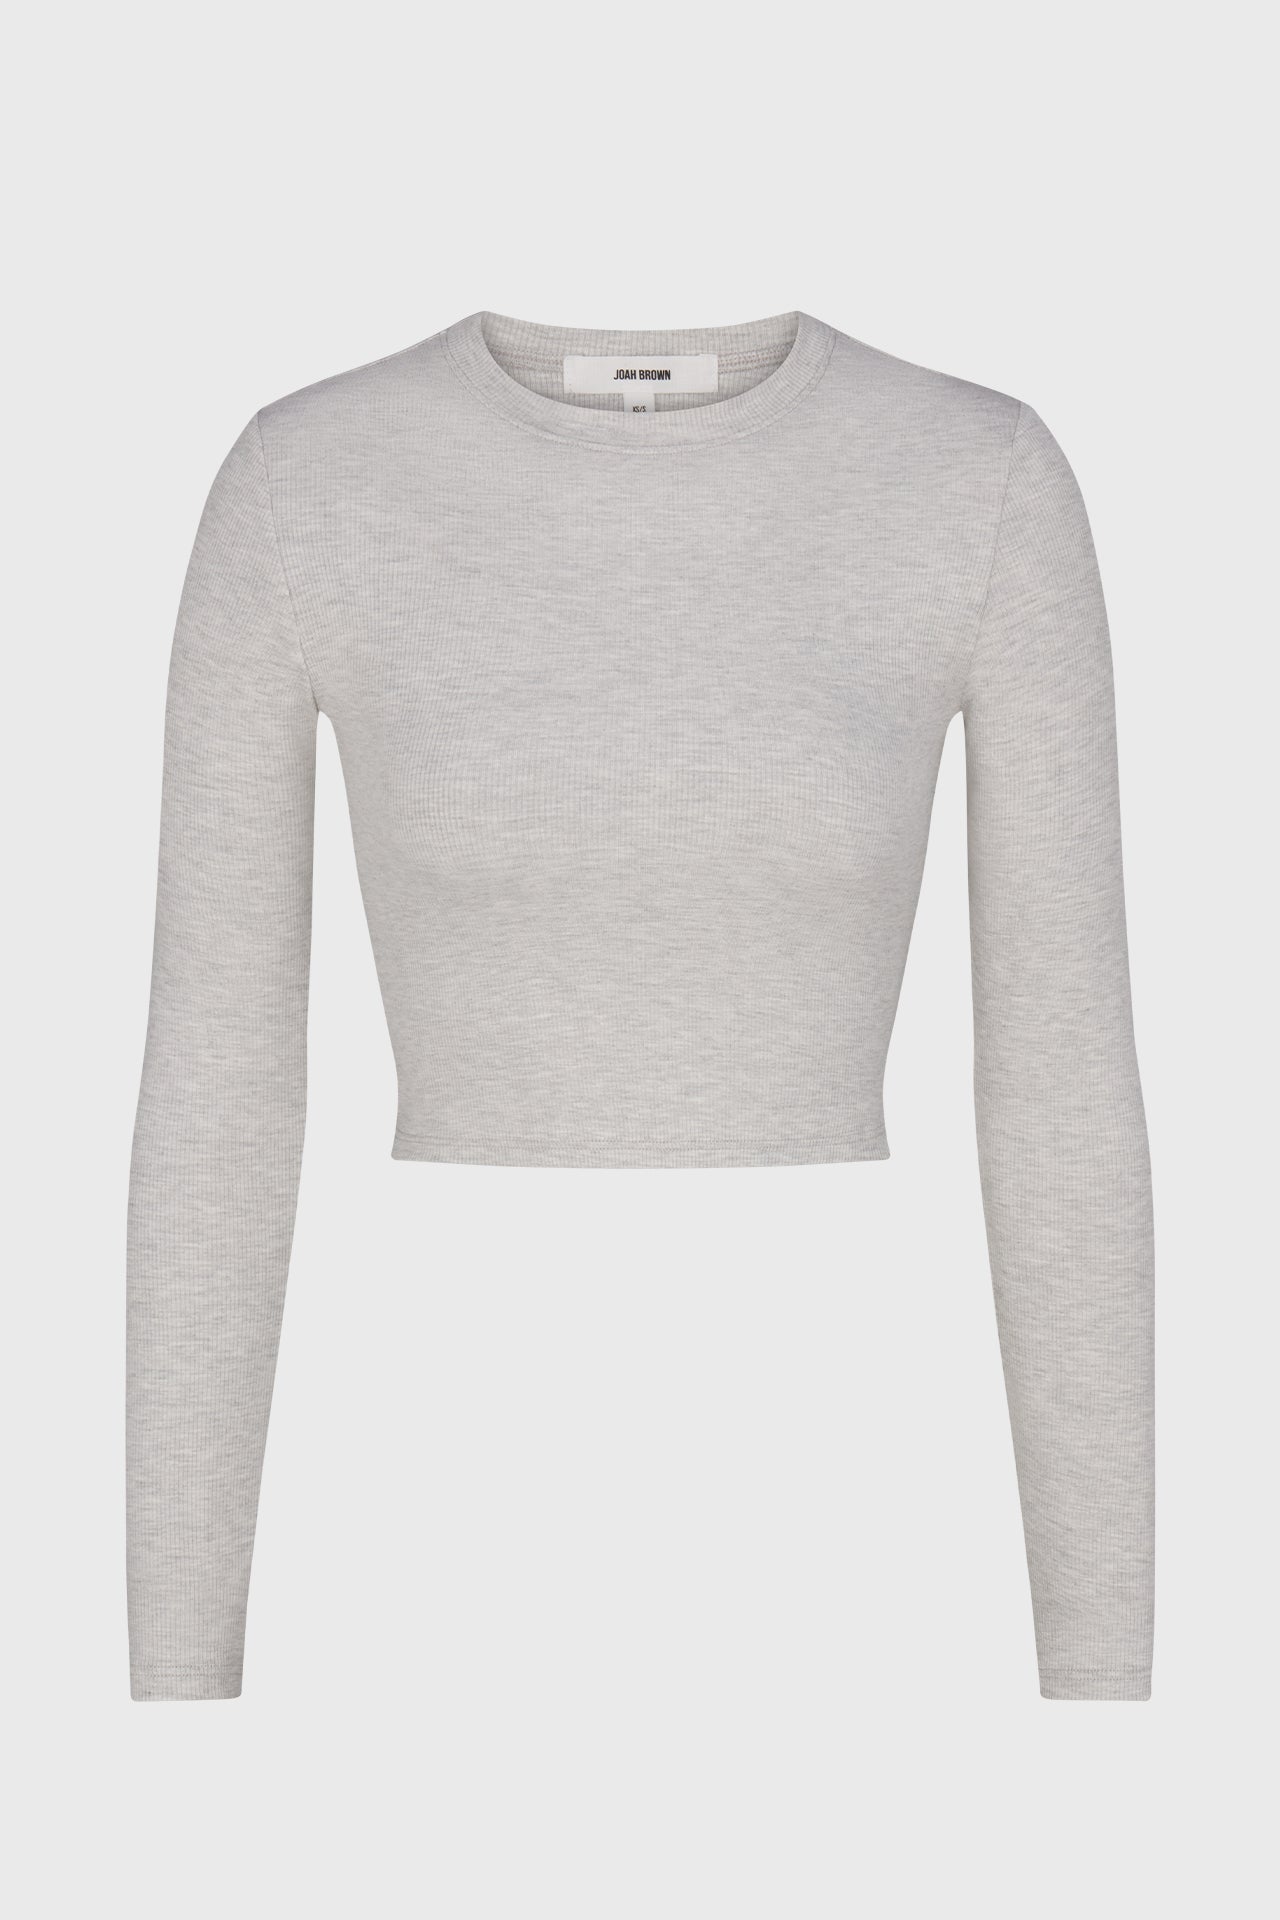 Flat lay front view of the fitted cropped pearl grey rib Cropped Crew Long Sleeve top with a crew neckline